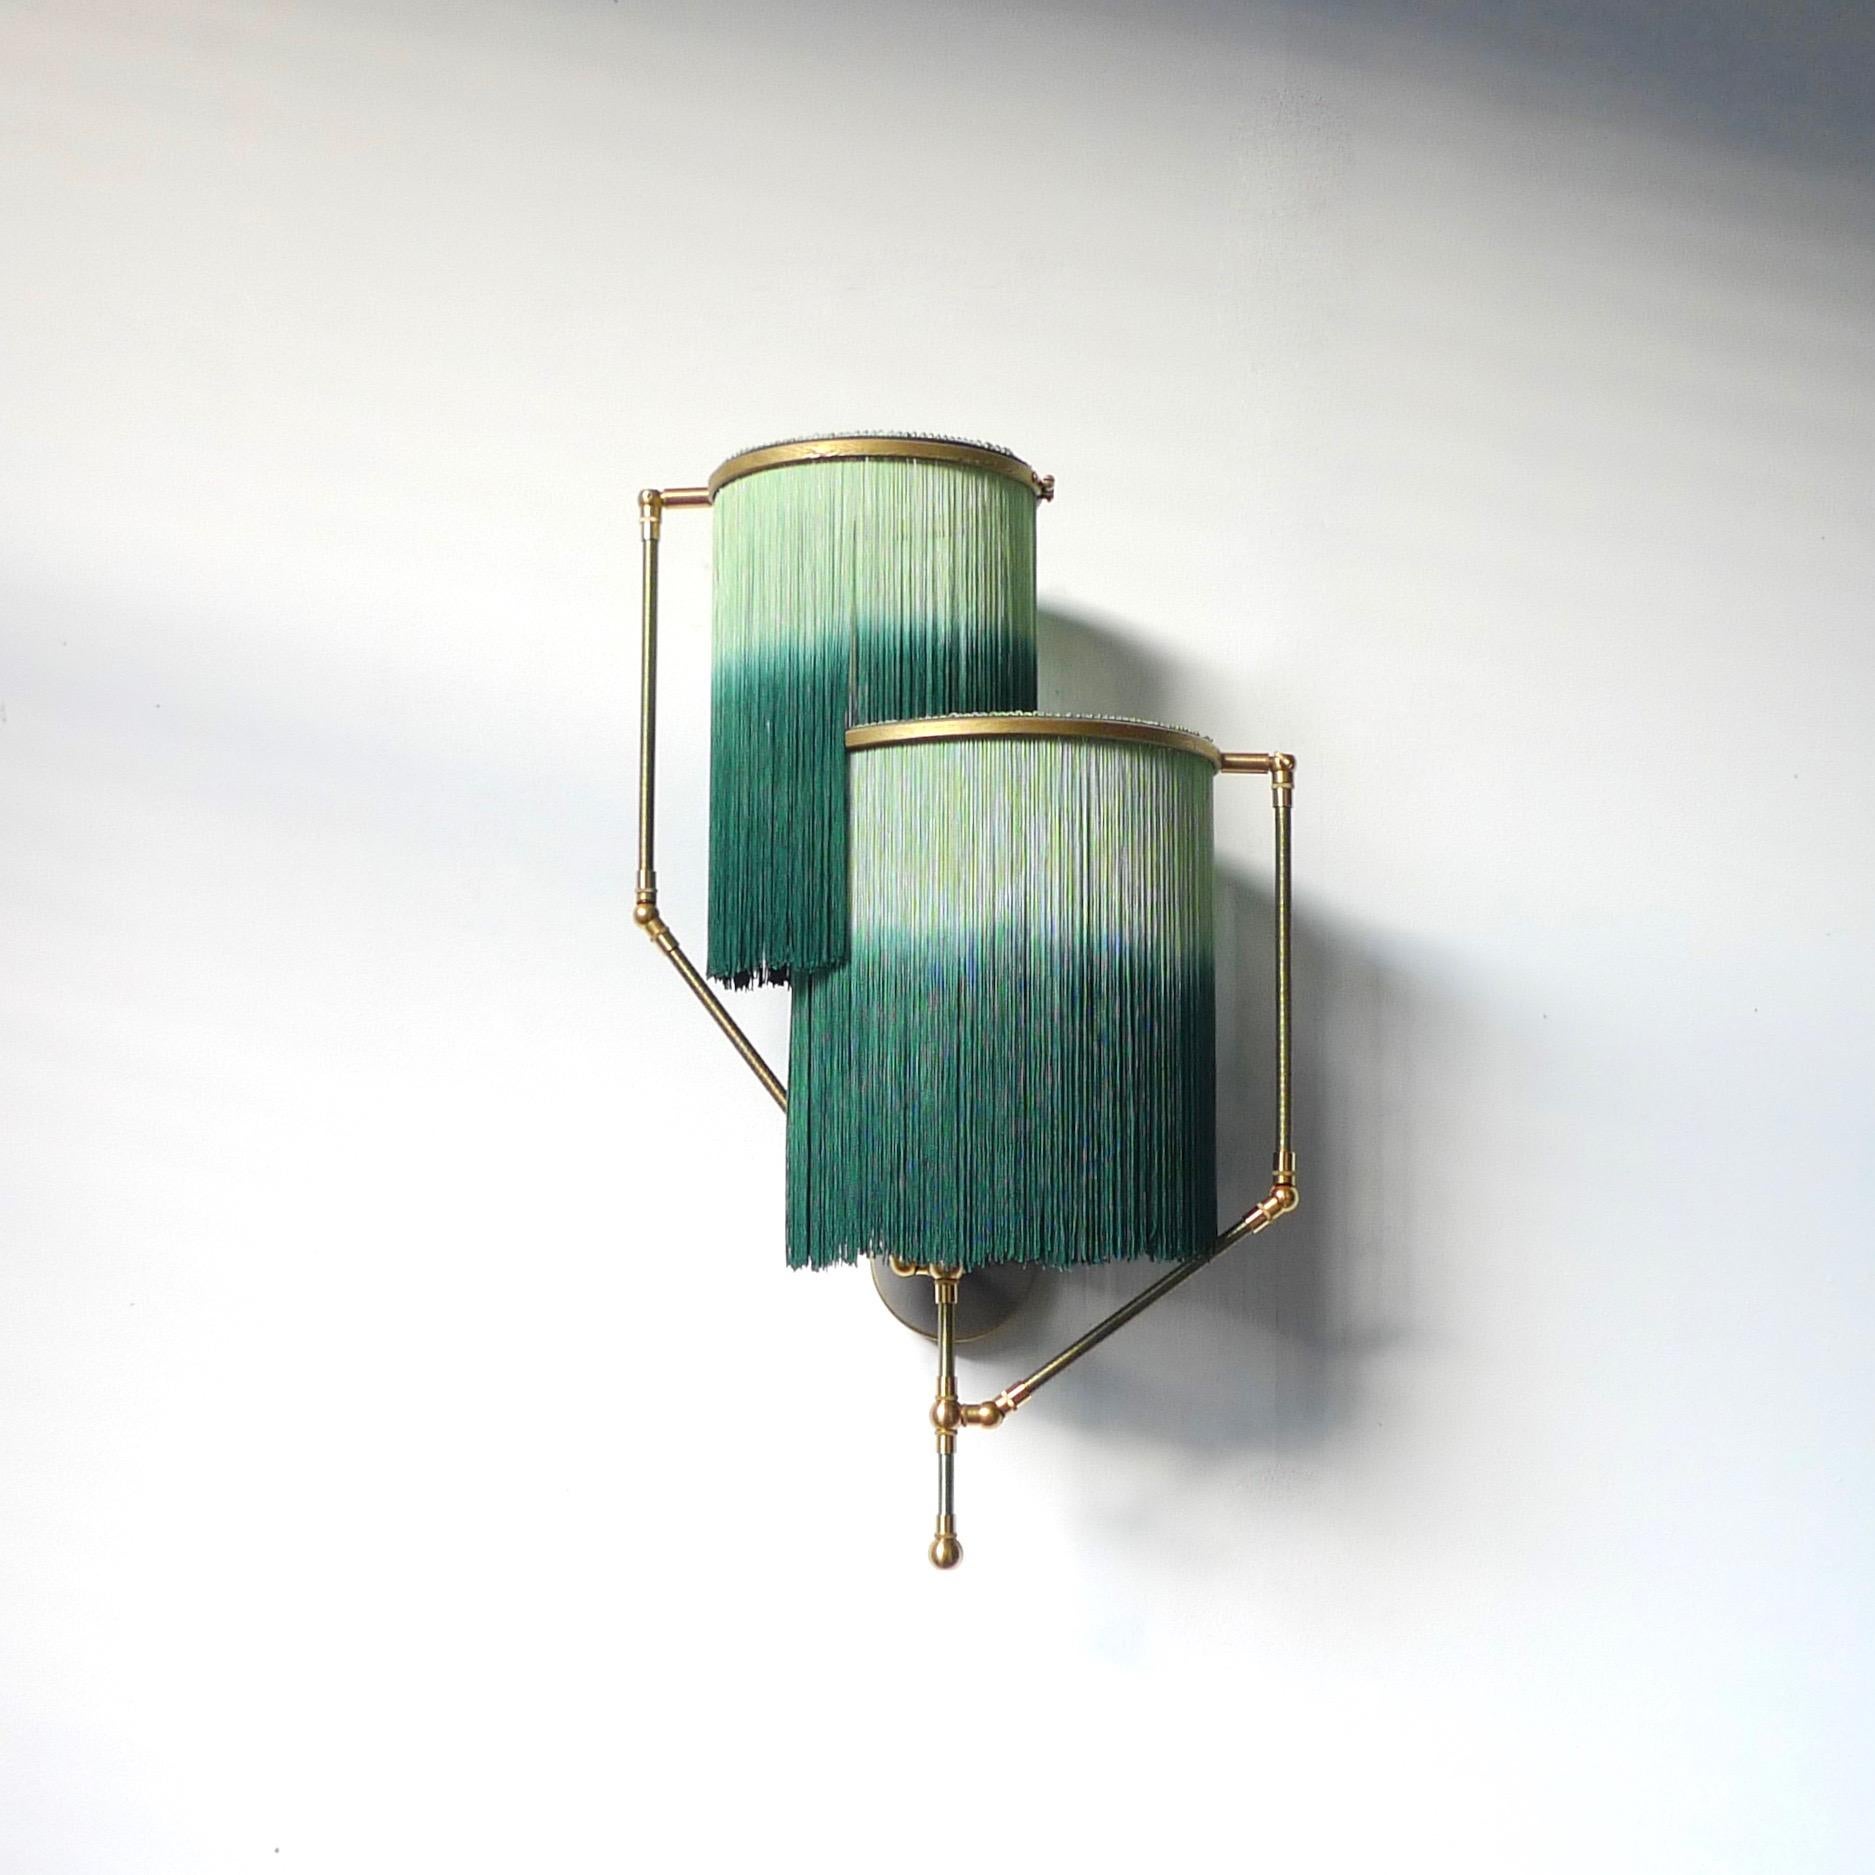 Green charme sconce lamp, Sander Bottinga

Dimensions: 50 x W 38 x D 27 cm
Hand-Sculpted in brass, leather, wood and dip dyed colored Fringes in viscose.
The movable arms makes it possible to move the circles with fringes in differed